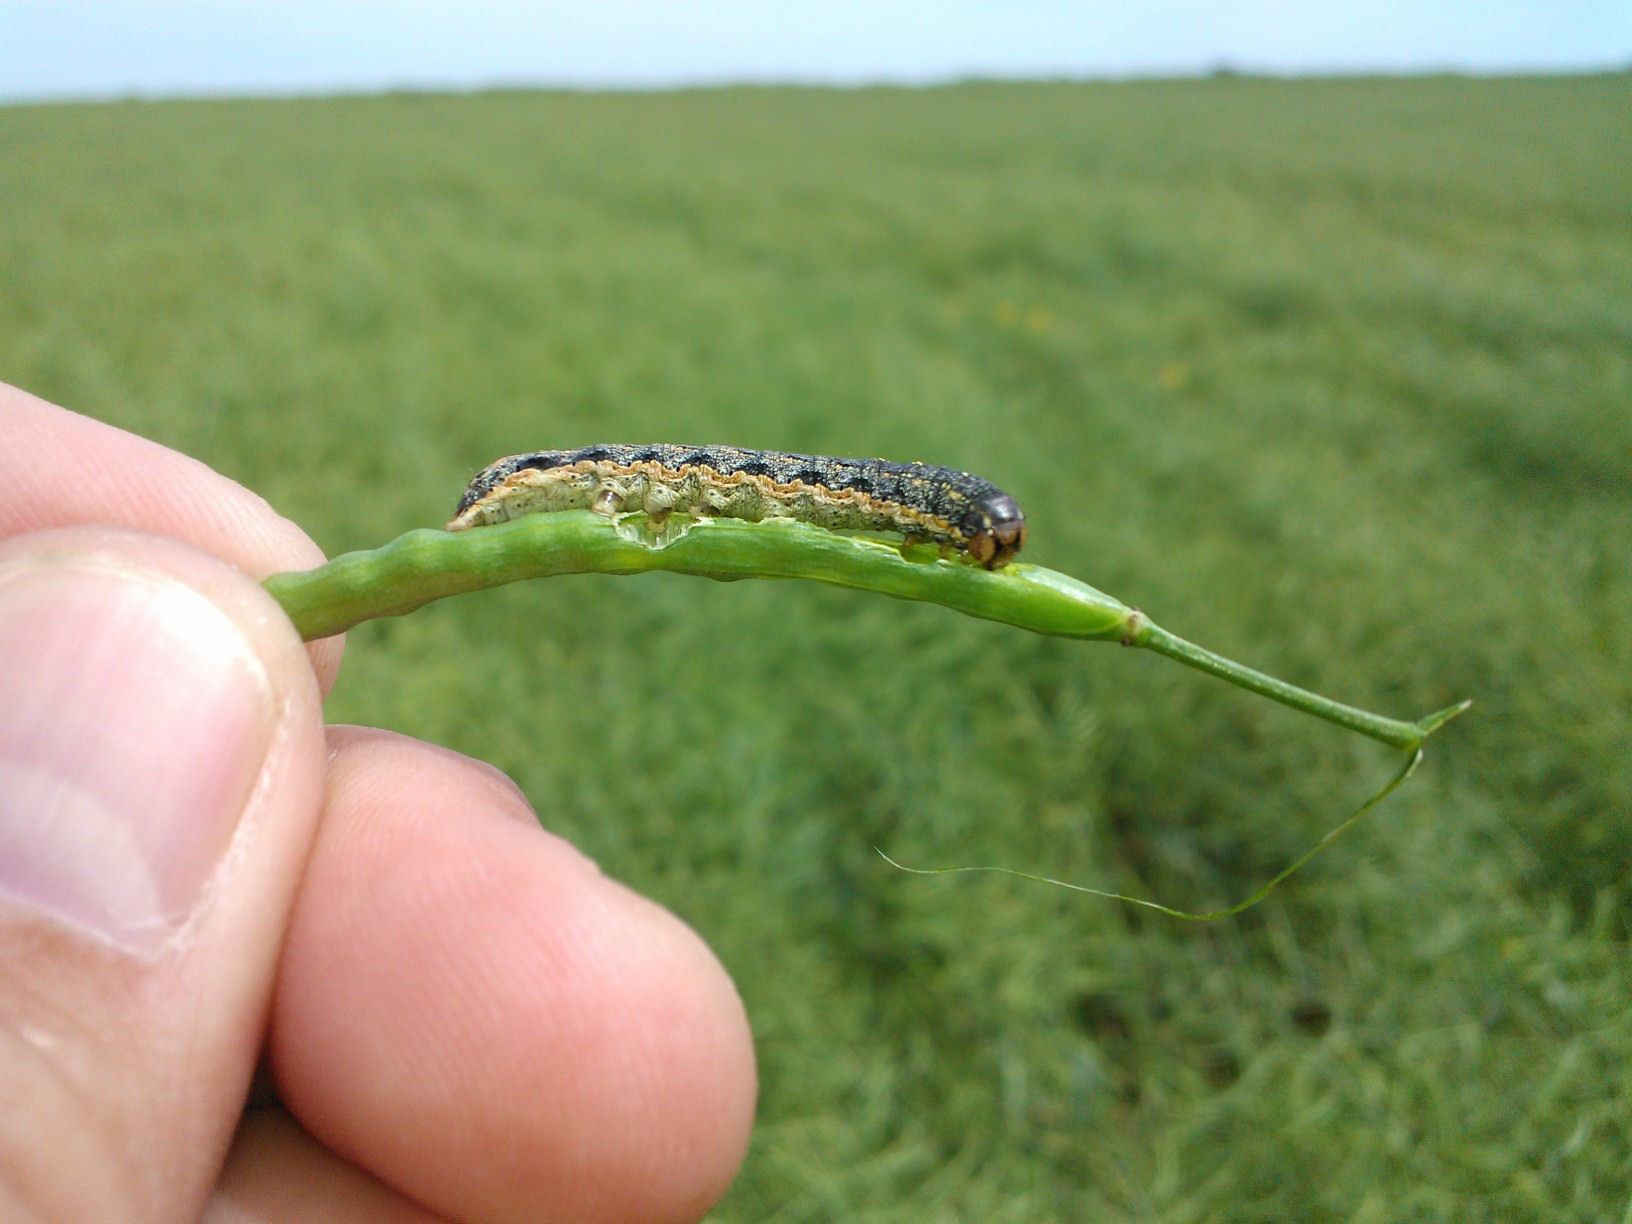 Scout for Cutworms/Armyworms and Spray When You Find Them in Your Canola